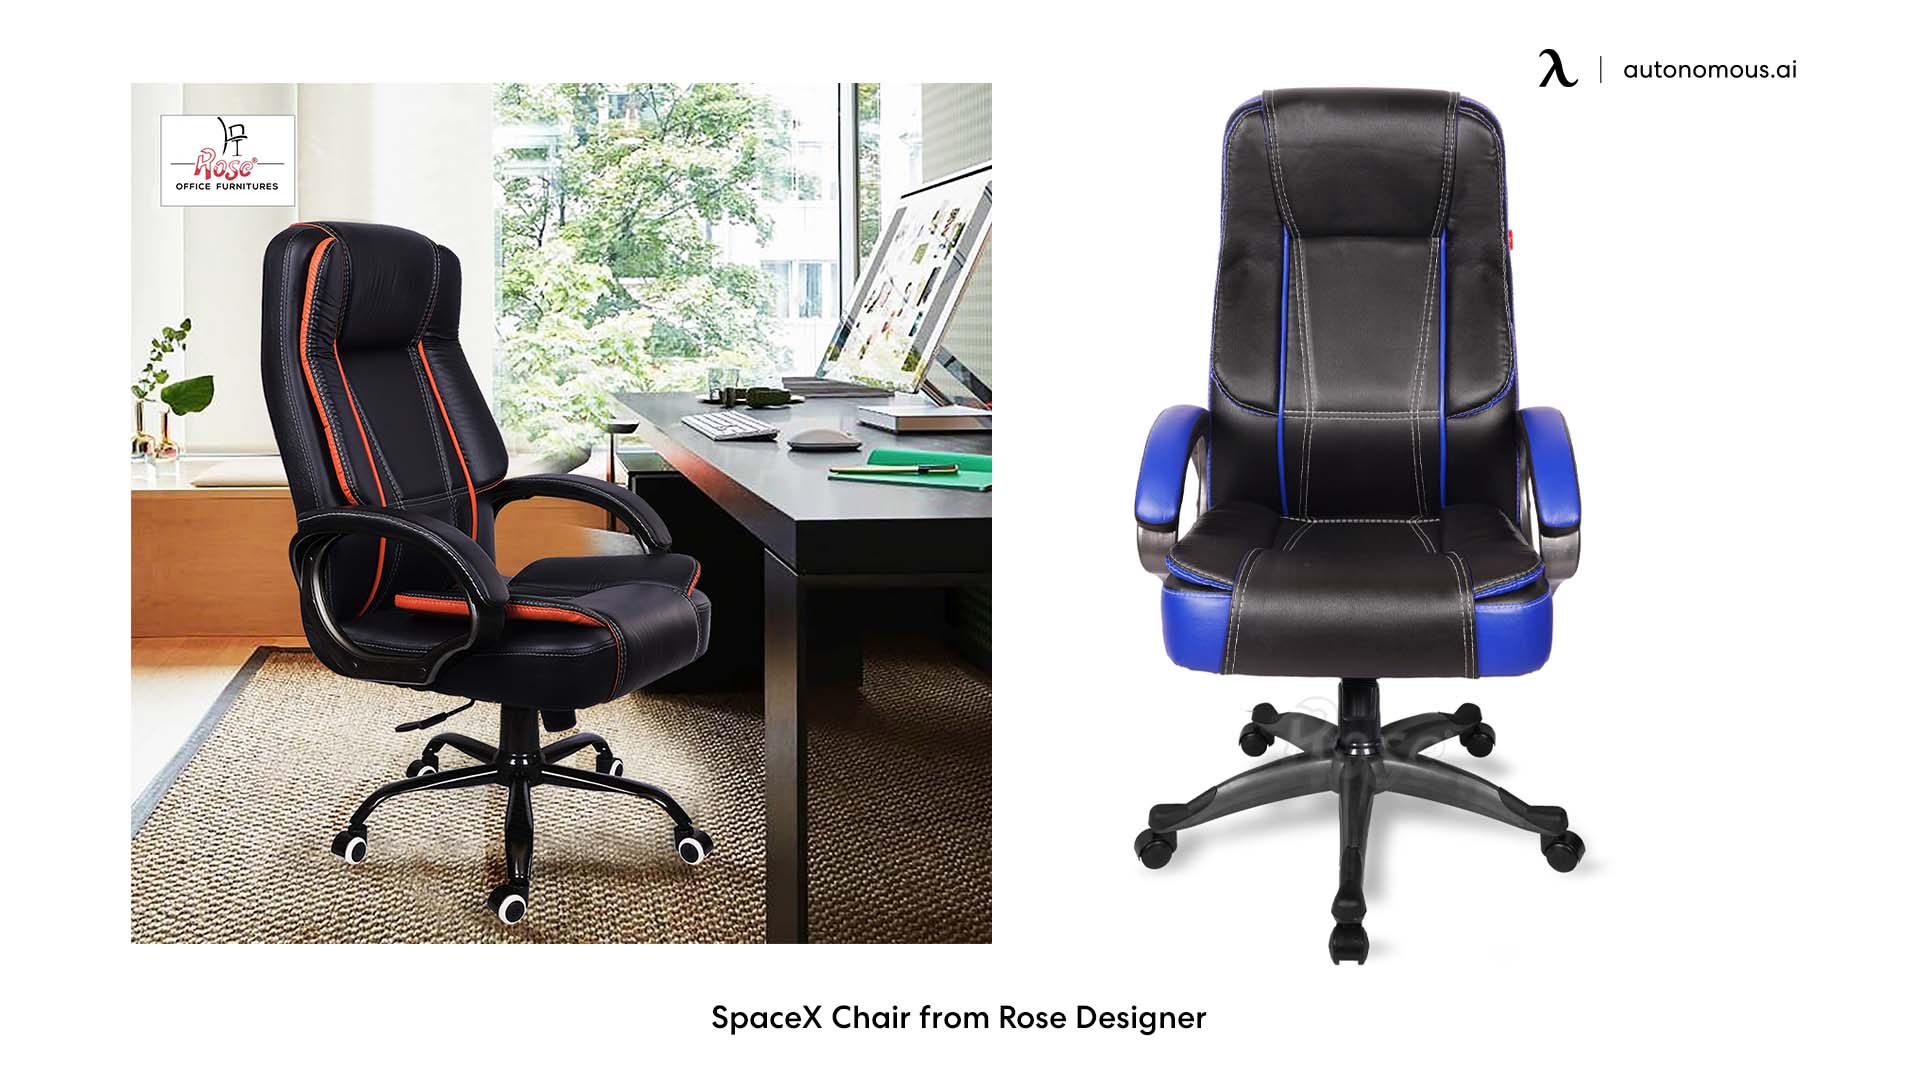 SpaceX cozy office chair from Rose Designer